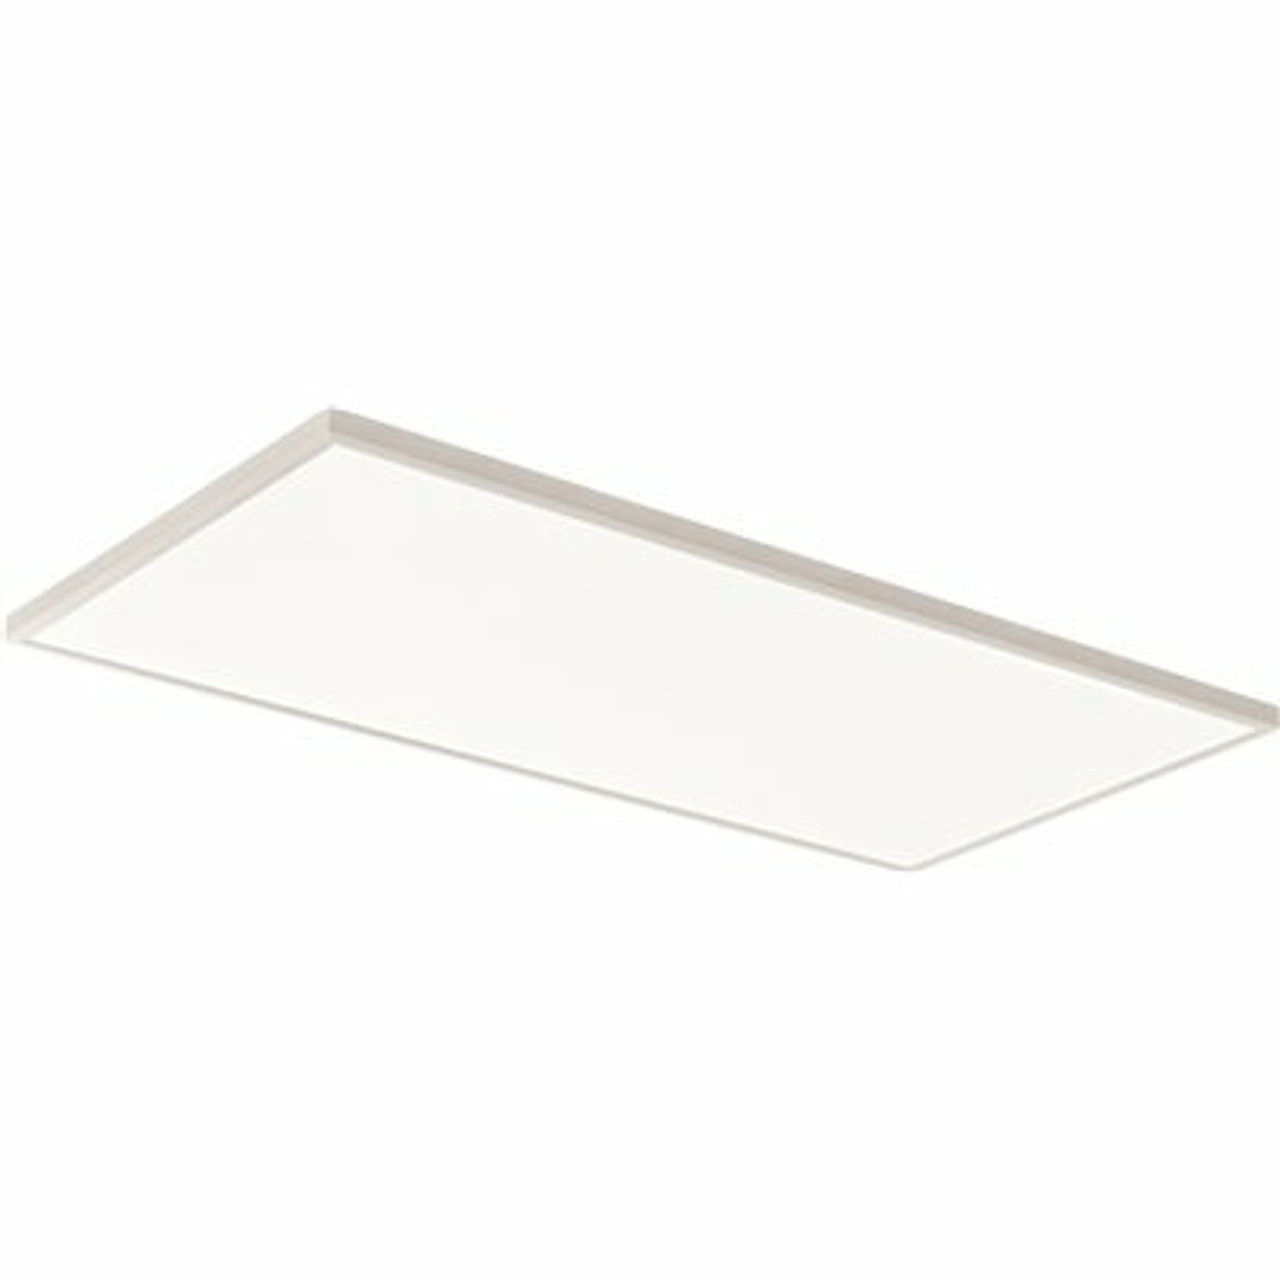 Lithonia Lighting Contractor Select Cpx 2 Ft. X 4 Ft. White Integrated Led 4692 Lumens Flat Panel Light, 4000K